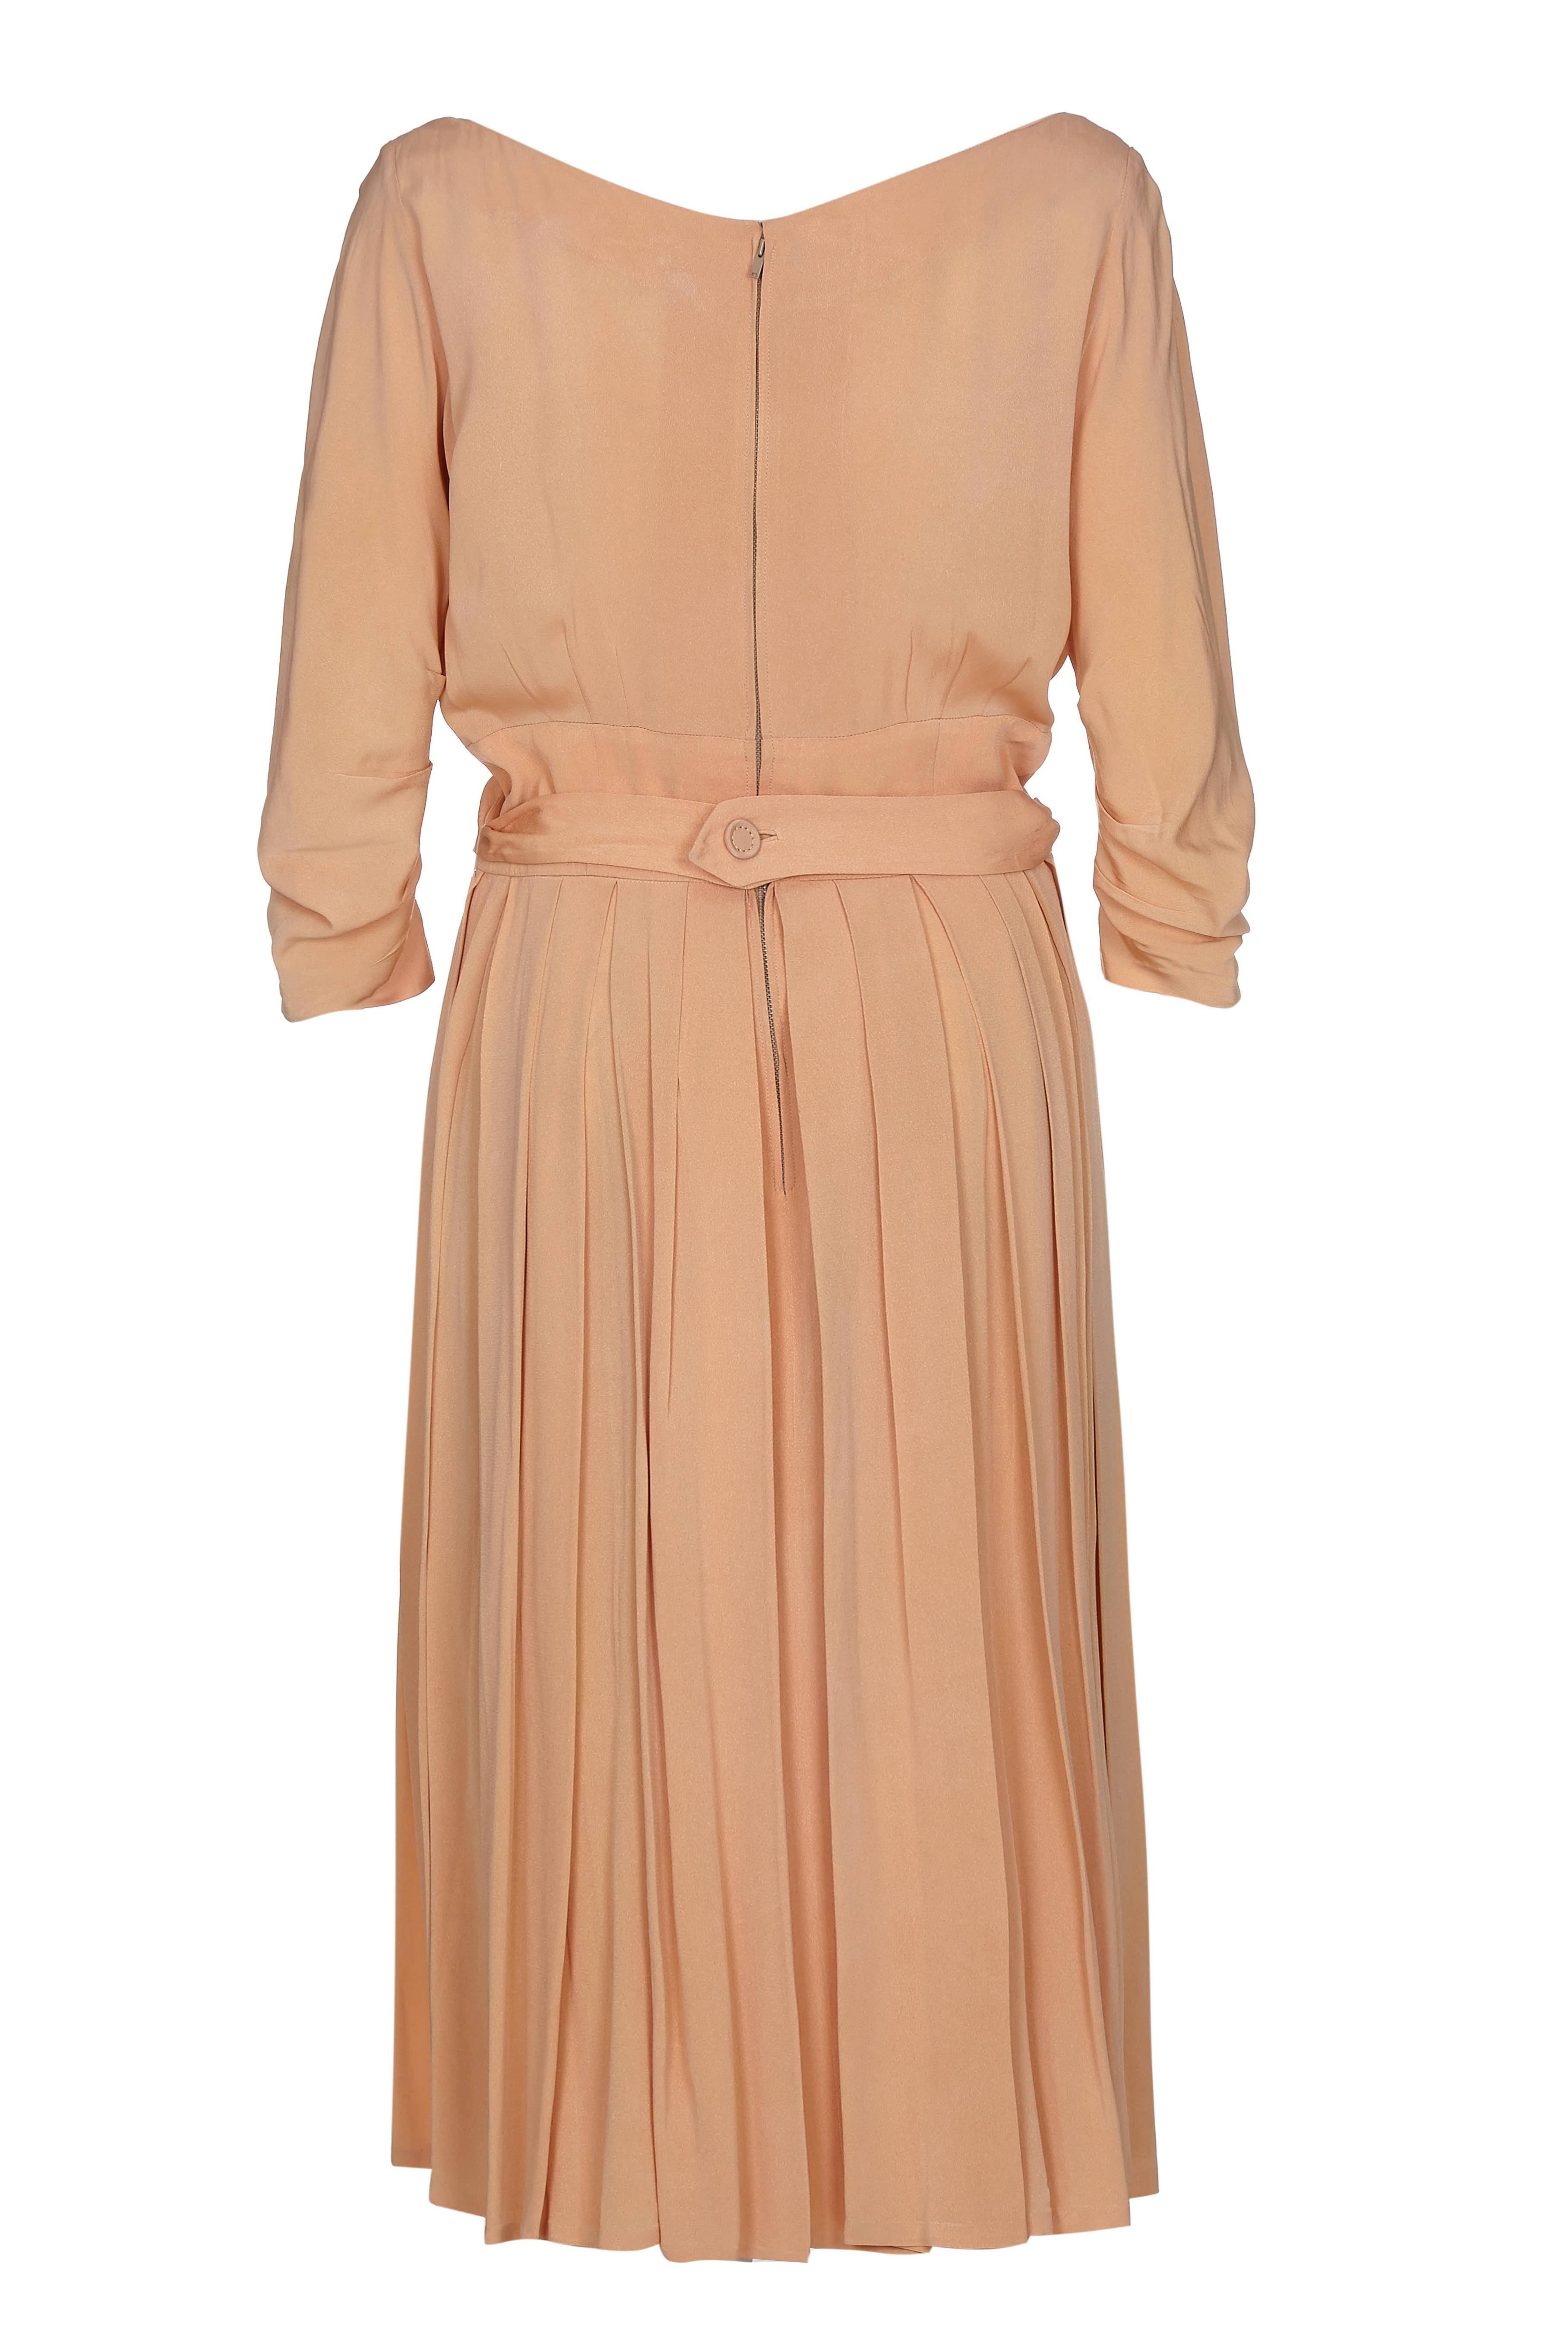 This exceptional 1950s Christian Dior peach silk dress with cross over bodice is a beautiful example of the designer's celebrated and timeless New Look aesthetic. With elegant line and construction, this piece showcases some exquisite tailoring with